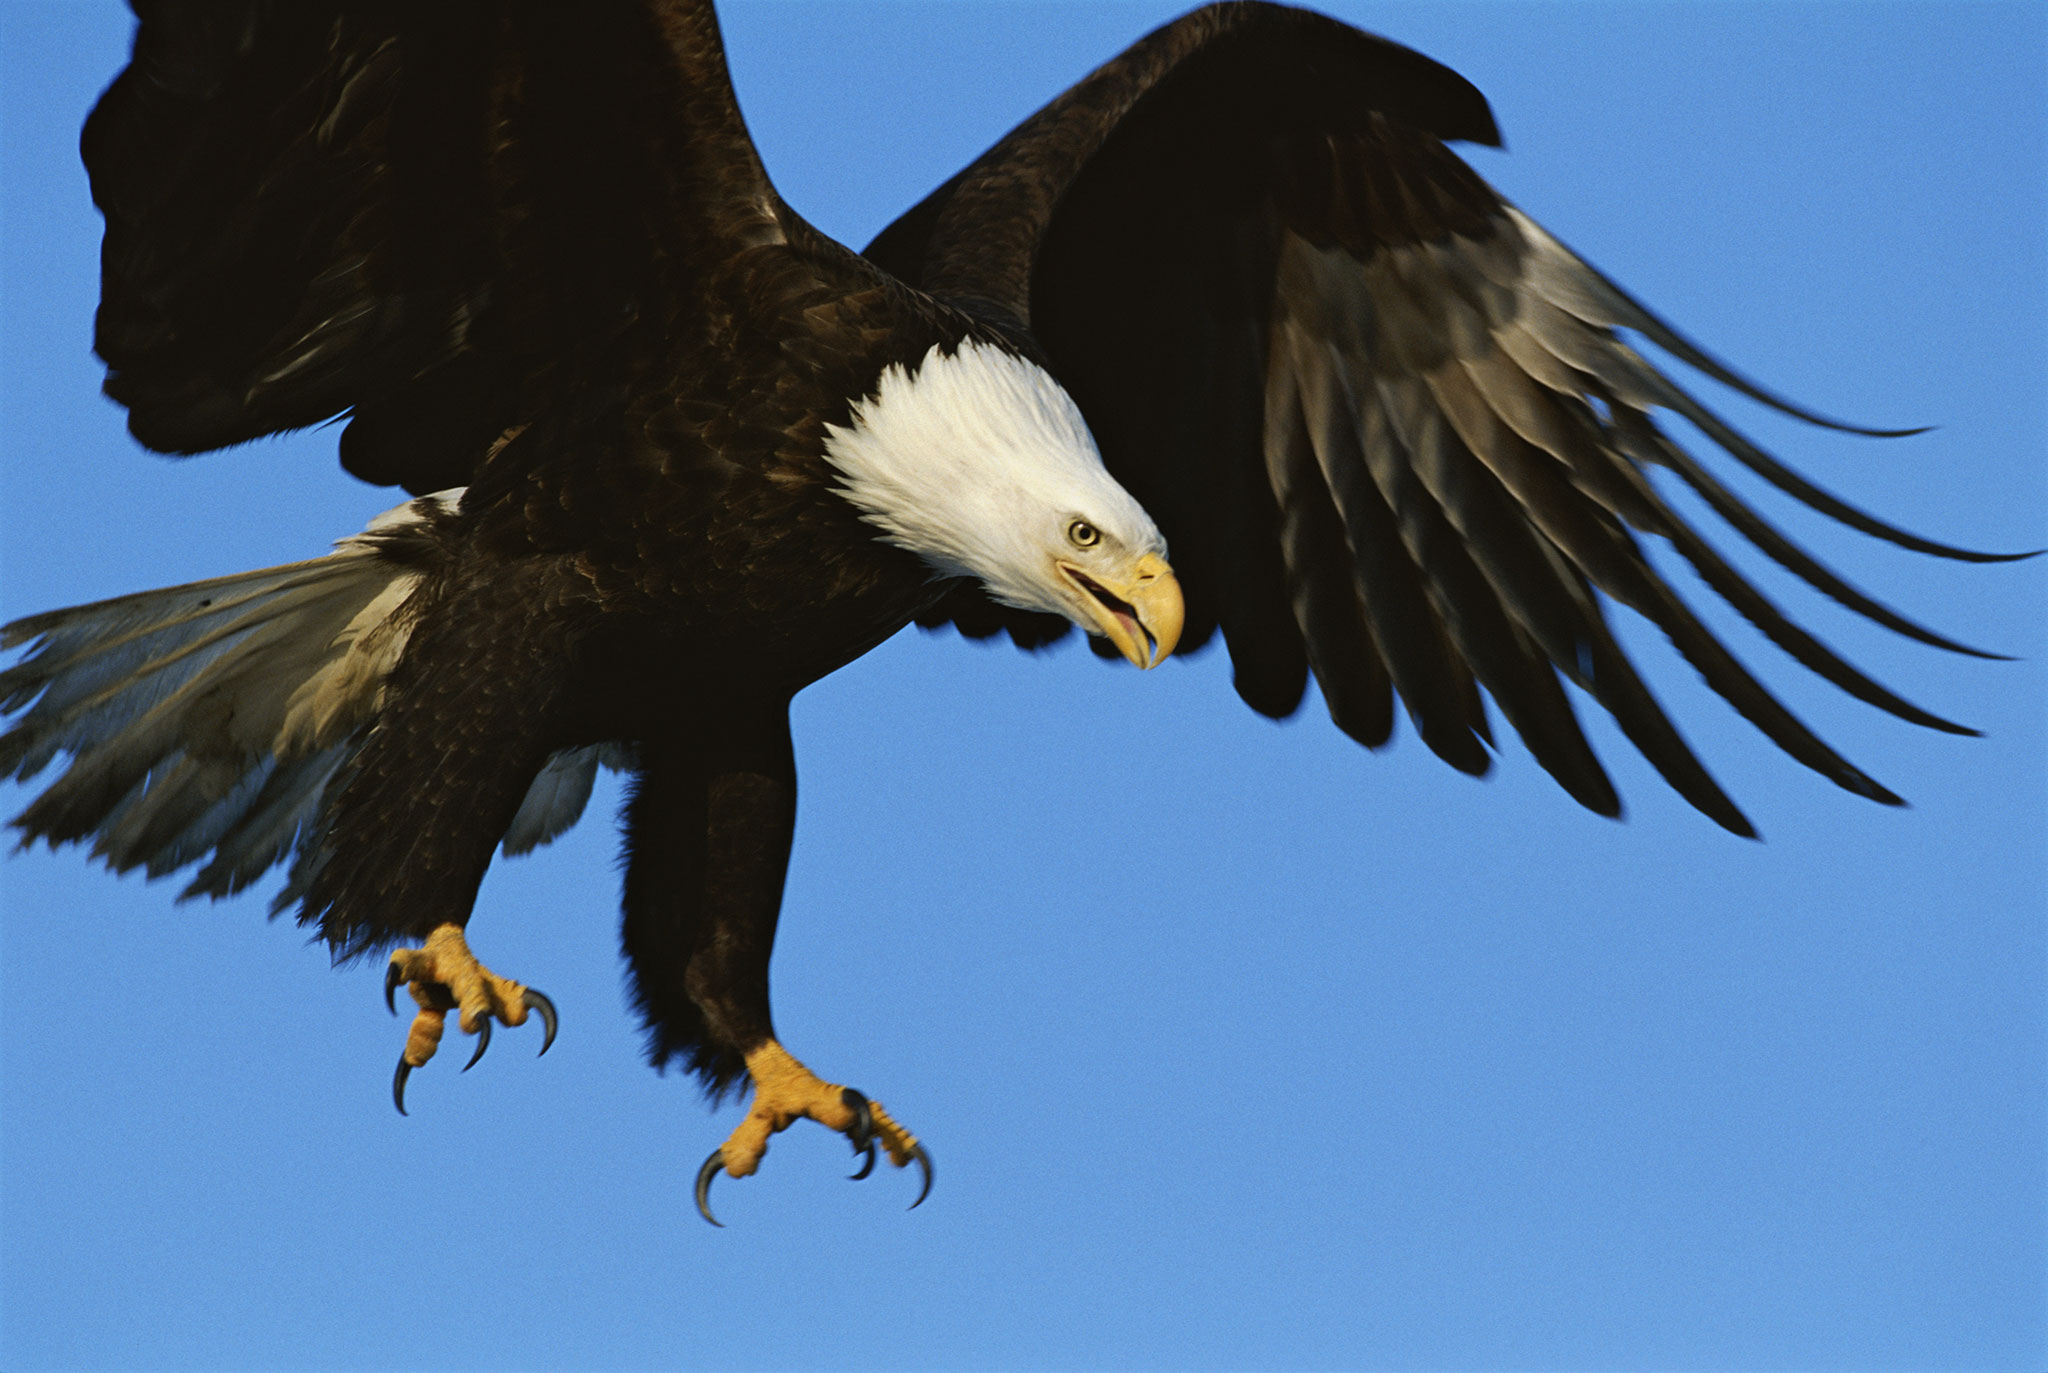 Let's Not Force Eagles to Fight Rogue Drones